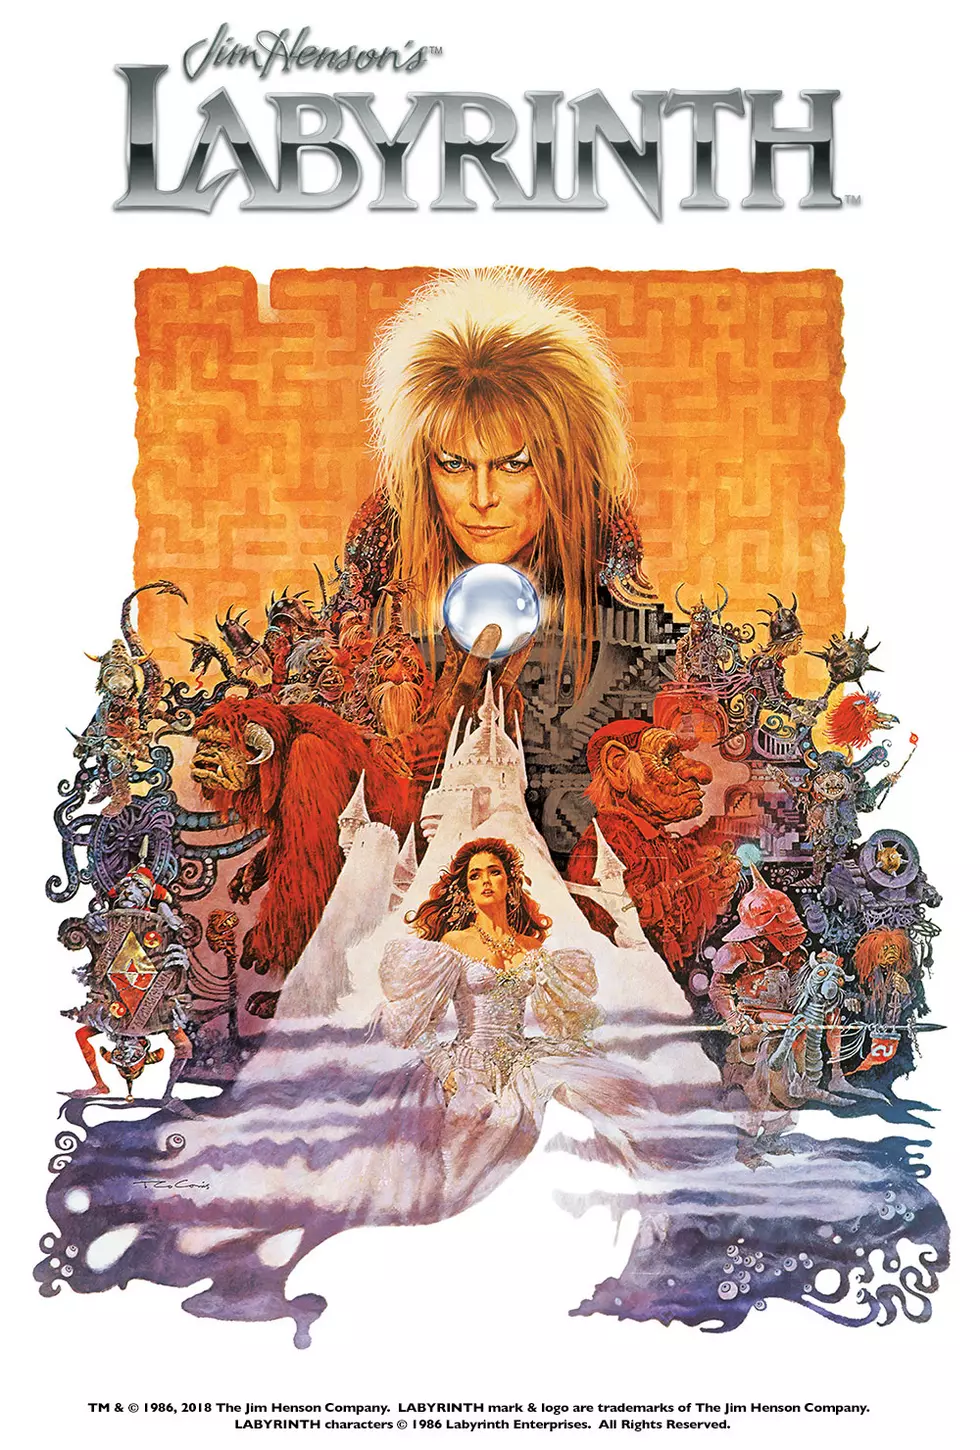 Hey Bowie Fans, ‘Labyrinth’ Is Coming to Danbury for 3 Days Only